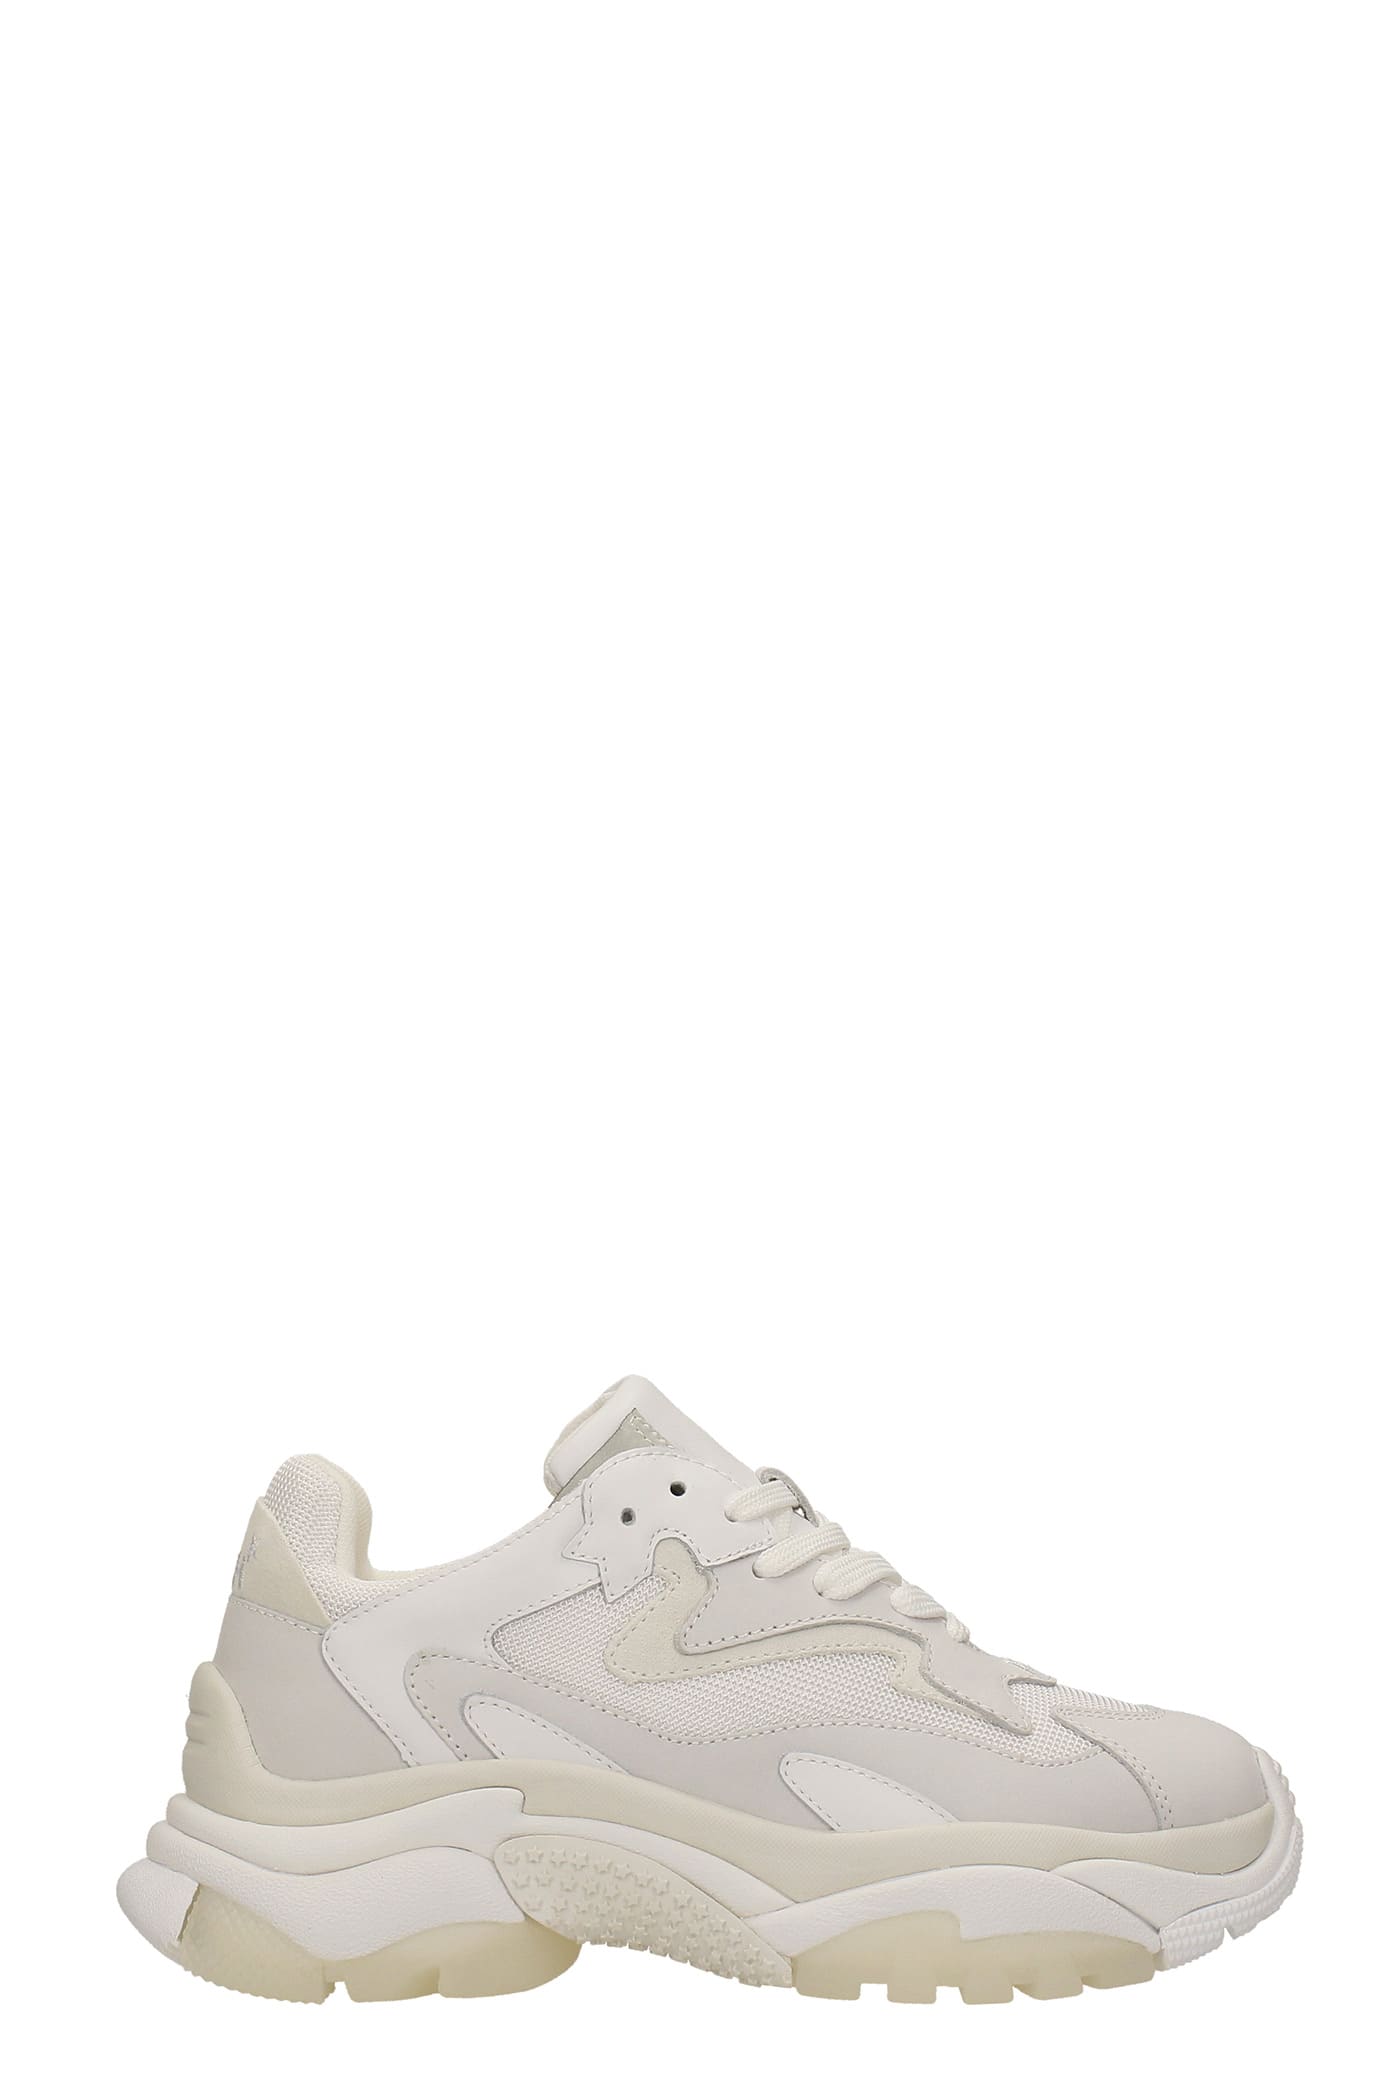 Ash Addict Sneakers In White Synthetic Fibers